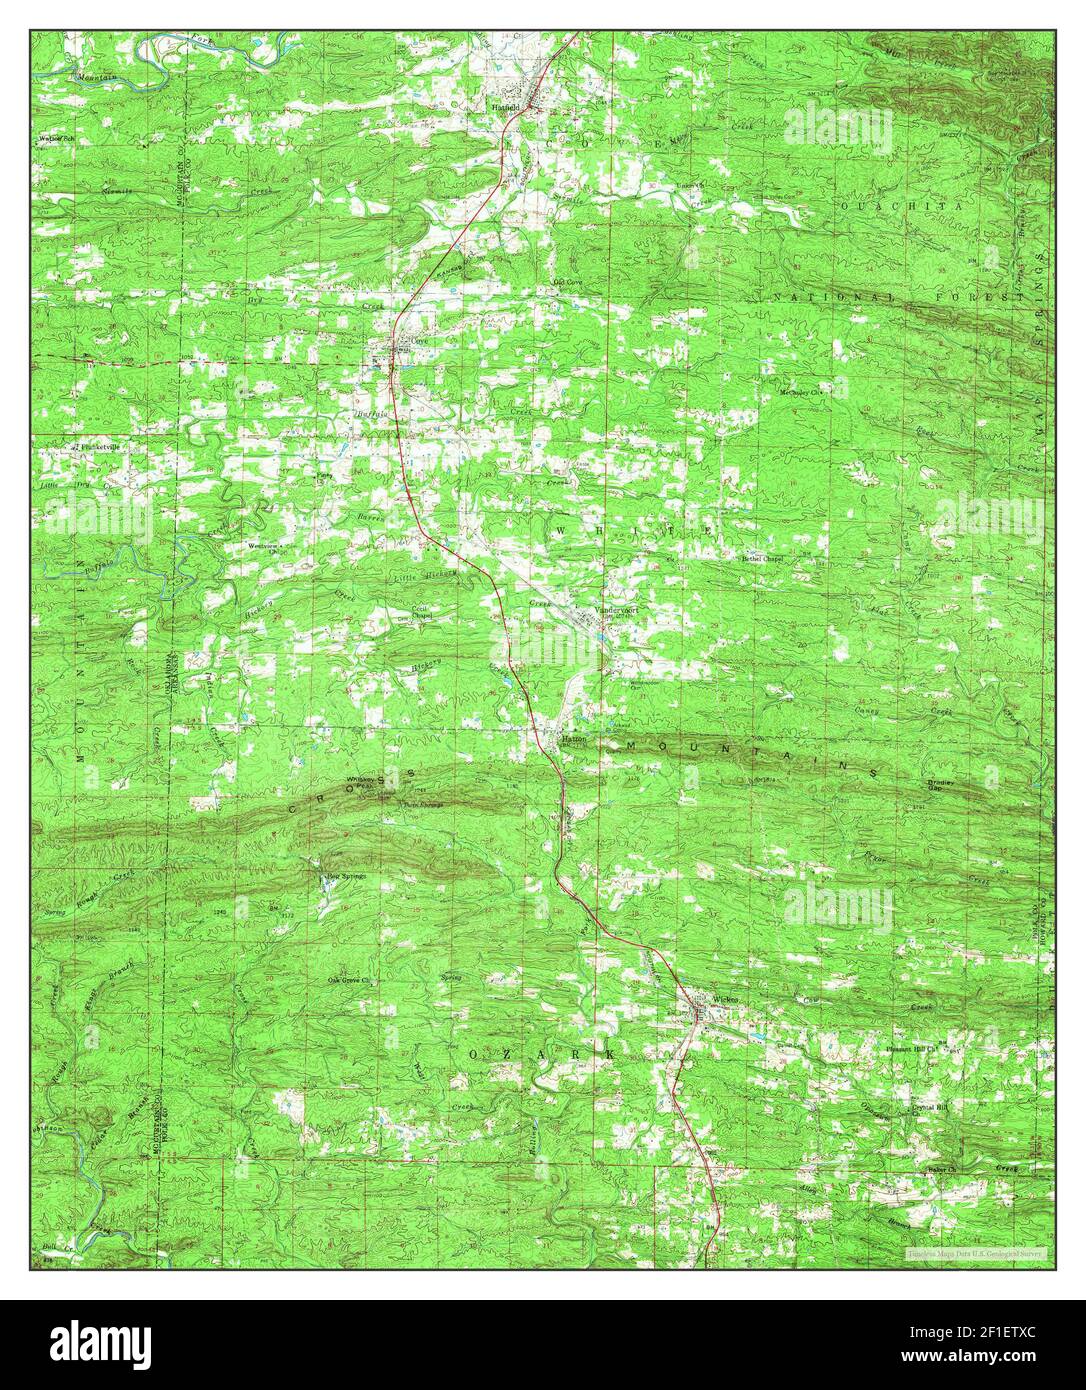 Cove, Arkansas, map 1959, 1:62500, United States of America by Timeless Maps, data U.S. Geological Survey Stock Photo